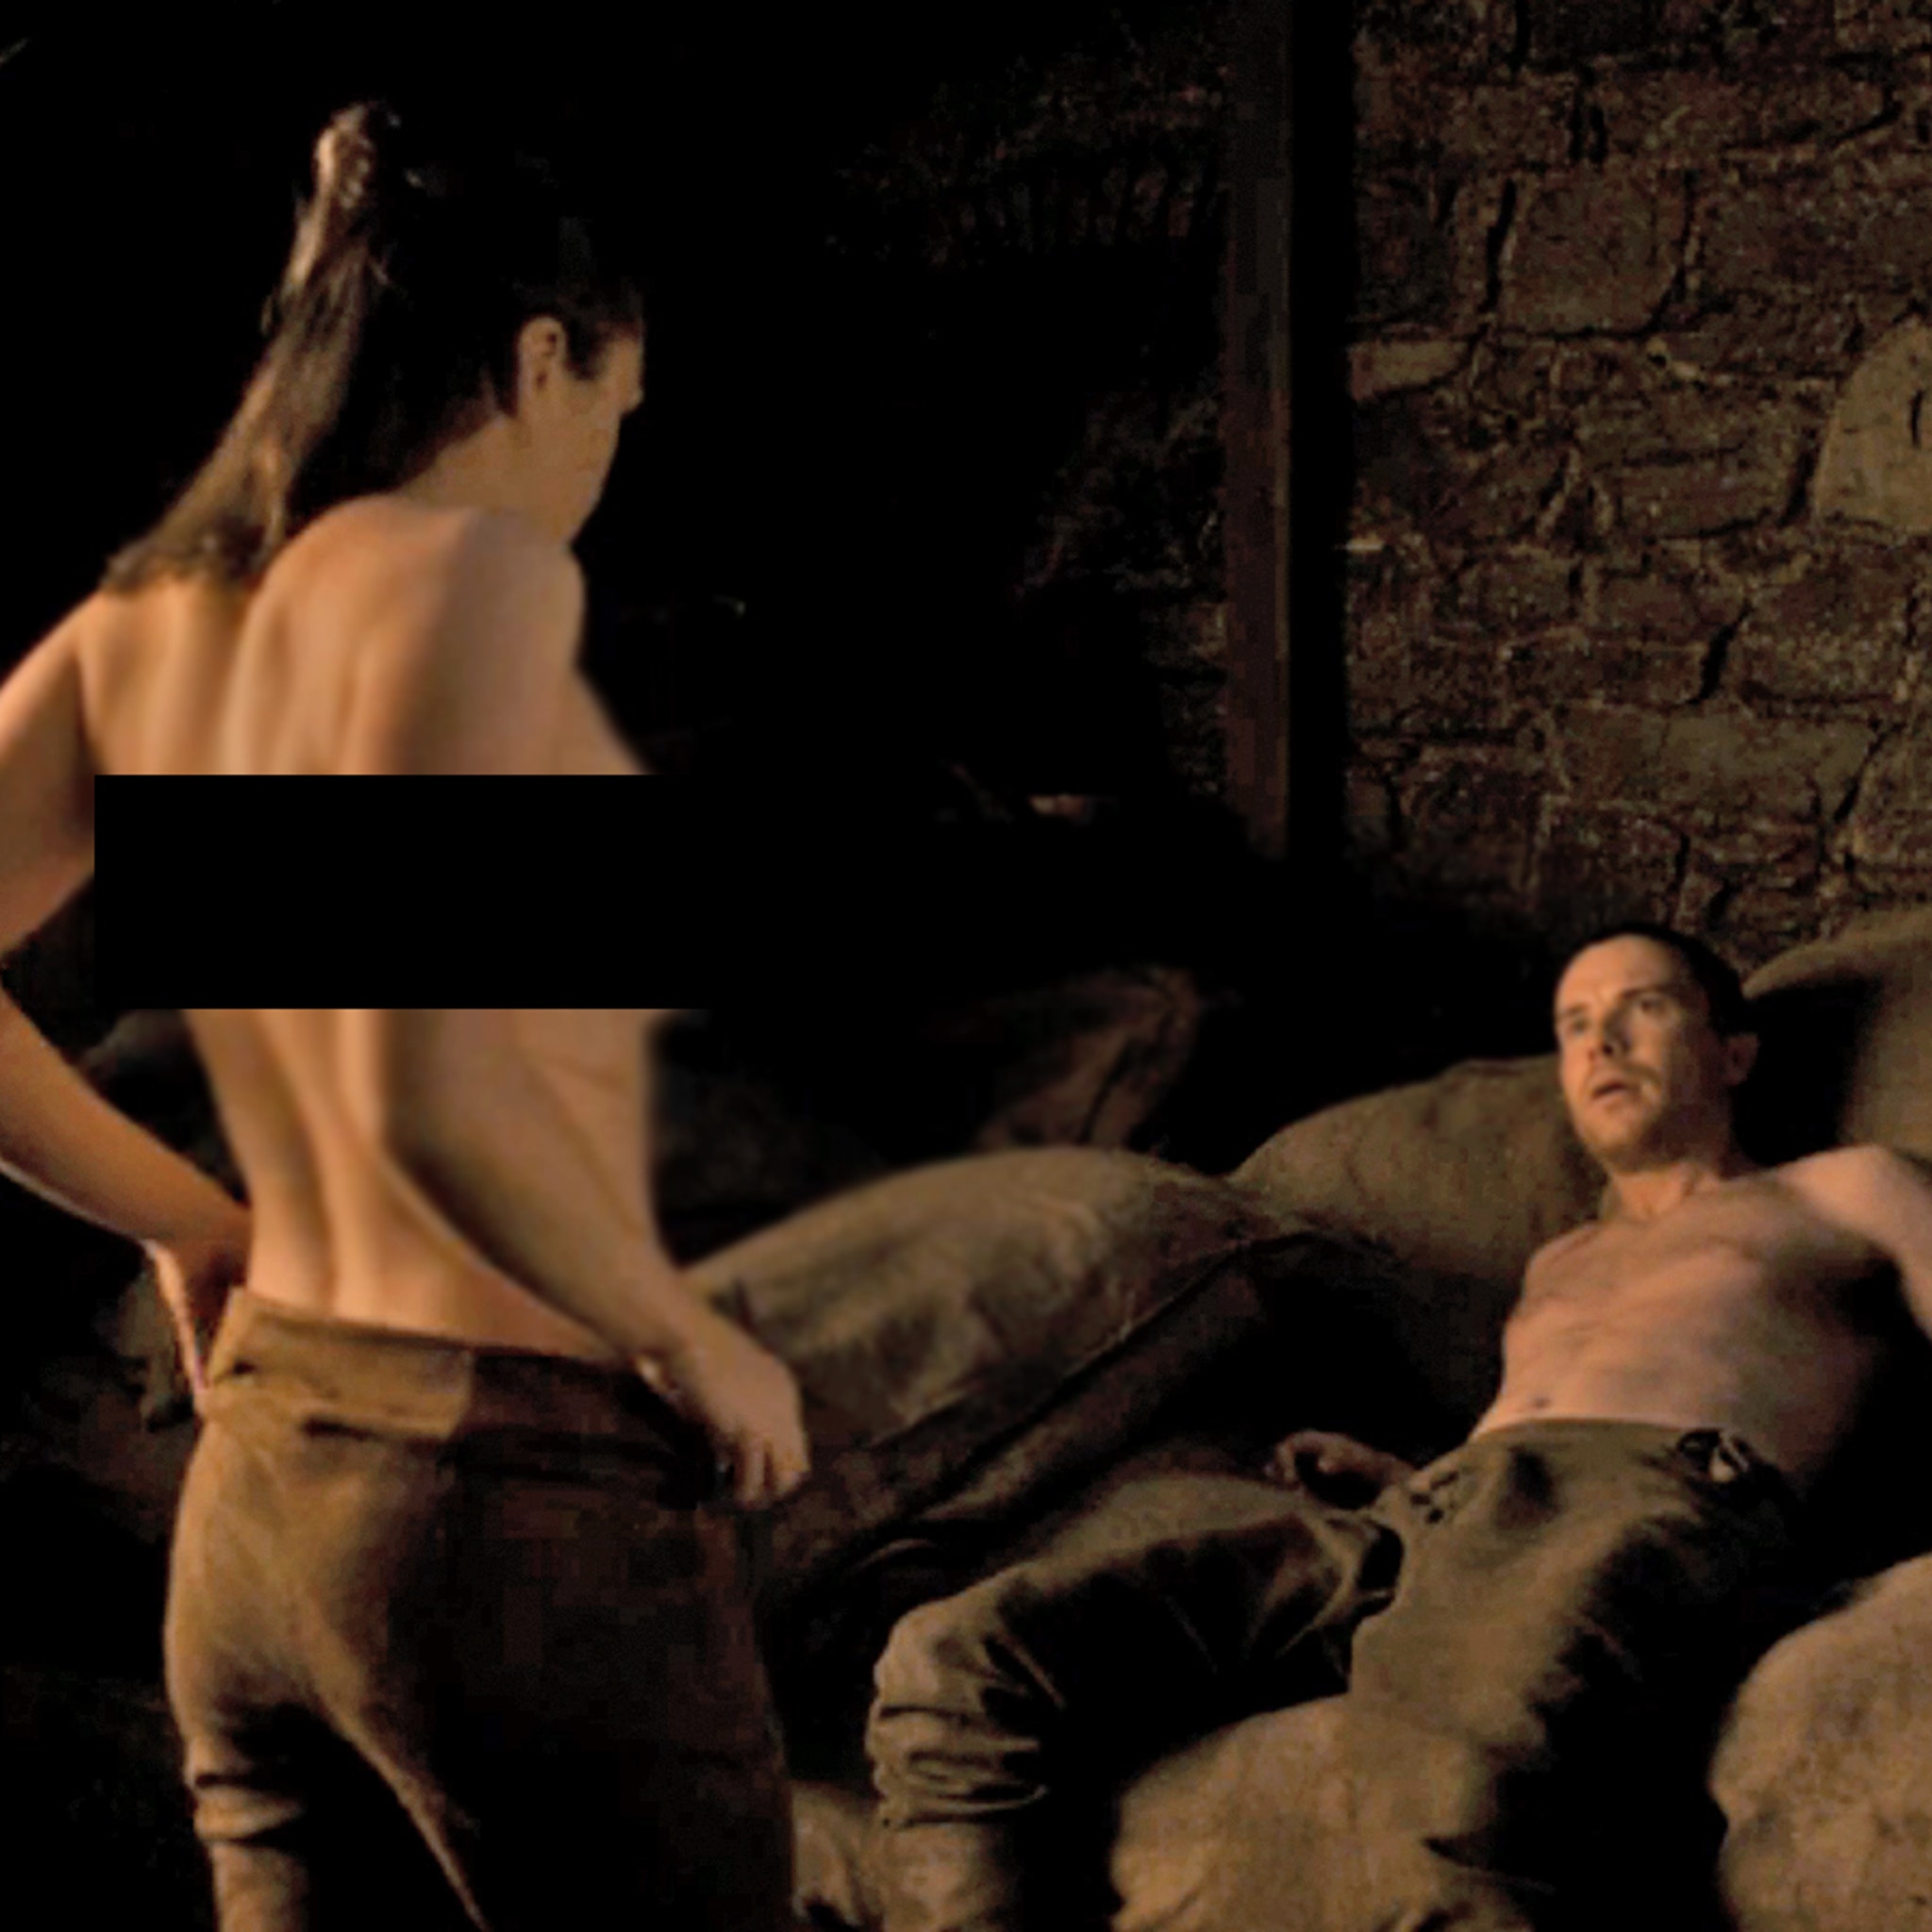 Game of thrones sex scene outside clothes on